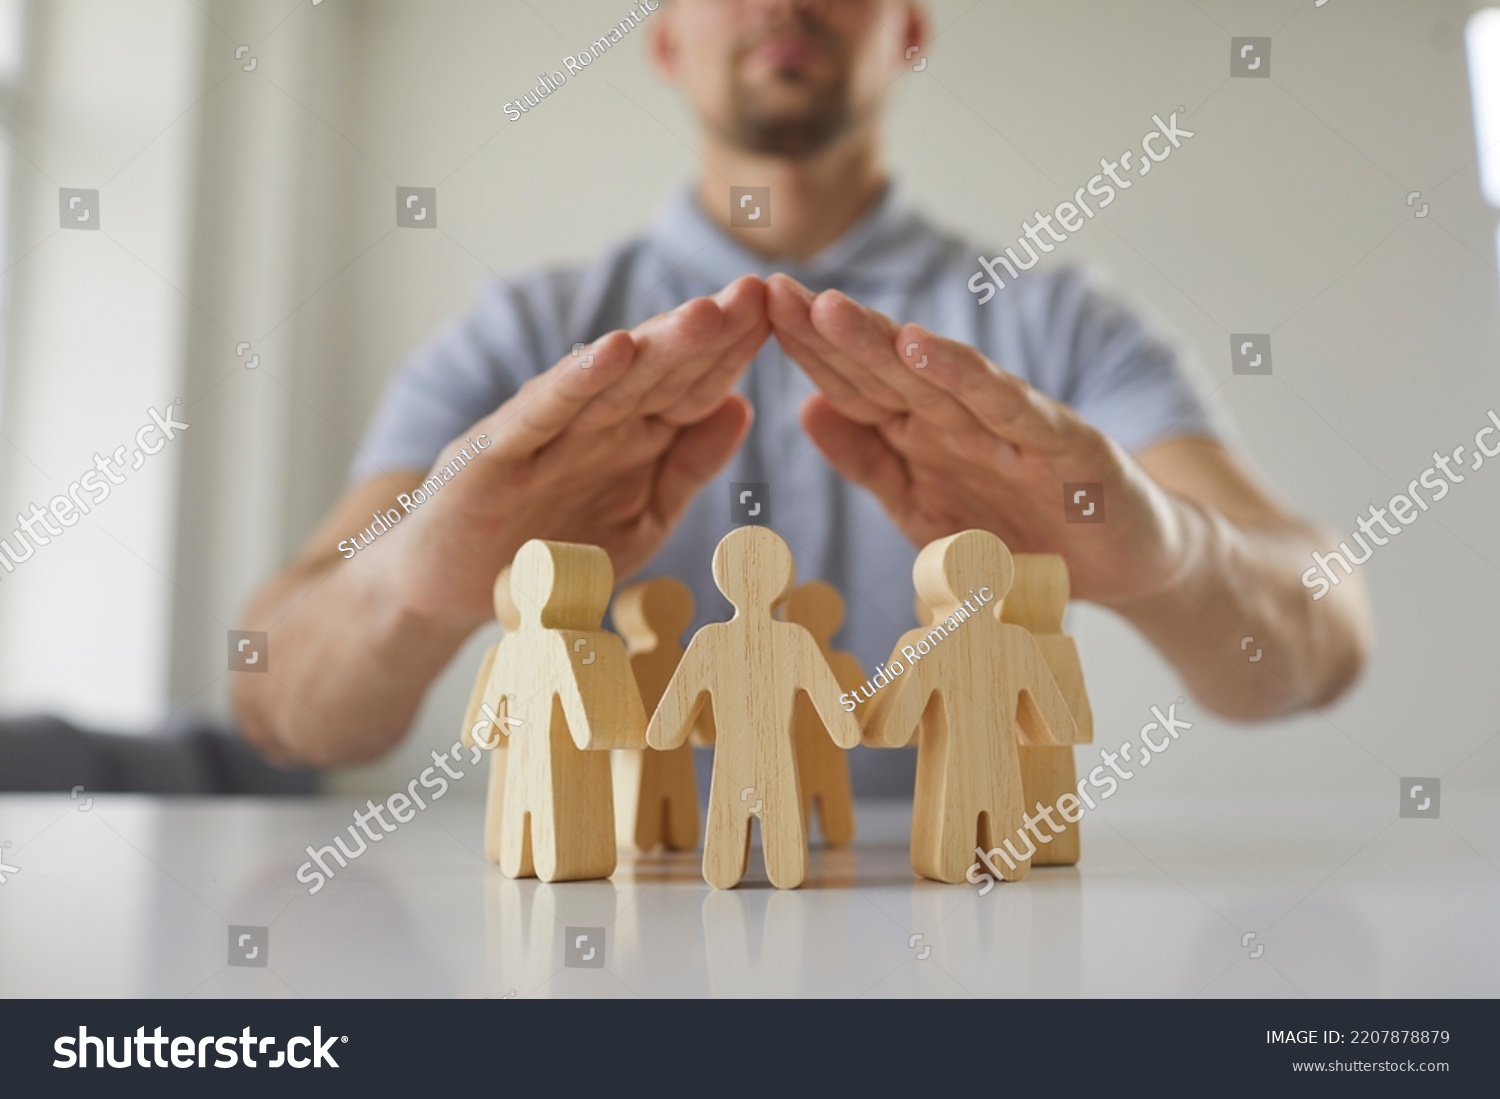 Young man holding hands above small wooden toy human figures placed on white desk as metaphor for human rights protection and safe community of people. Close up, closeup. Society, care, safety concept #2207878879